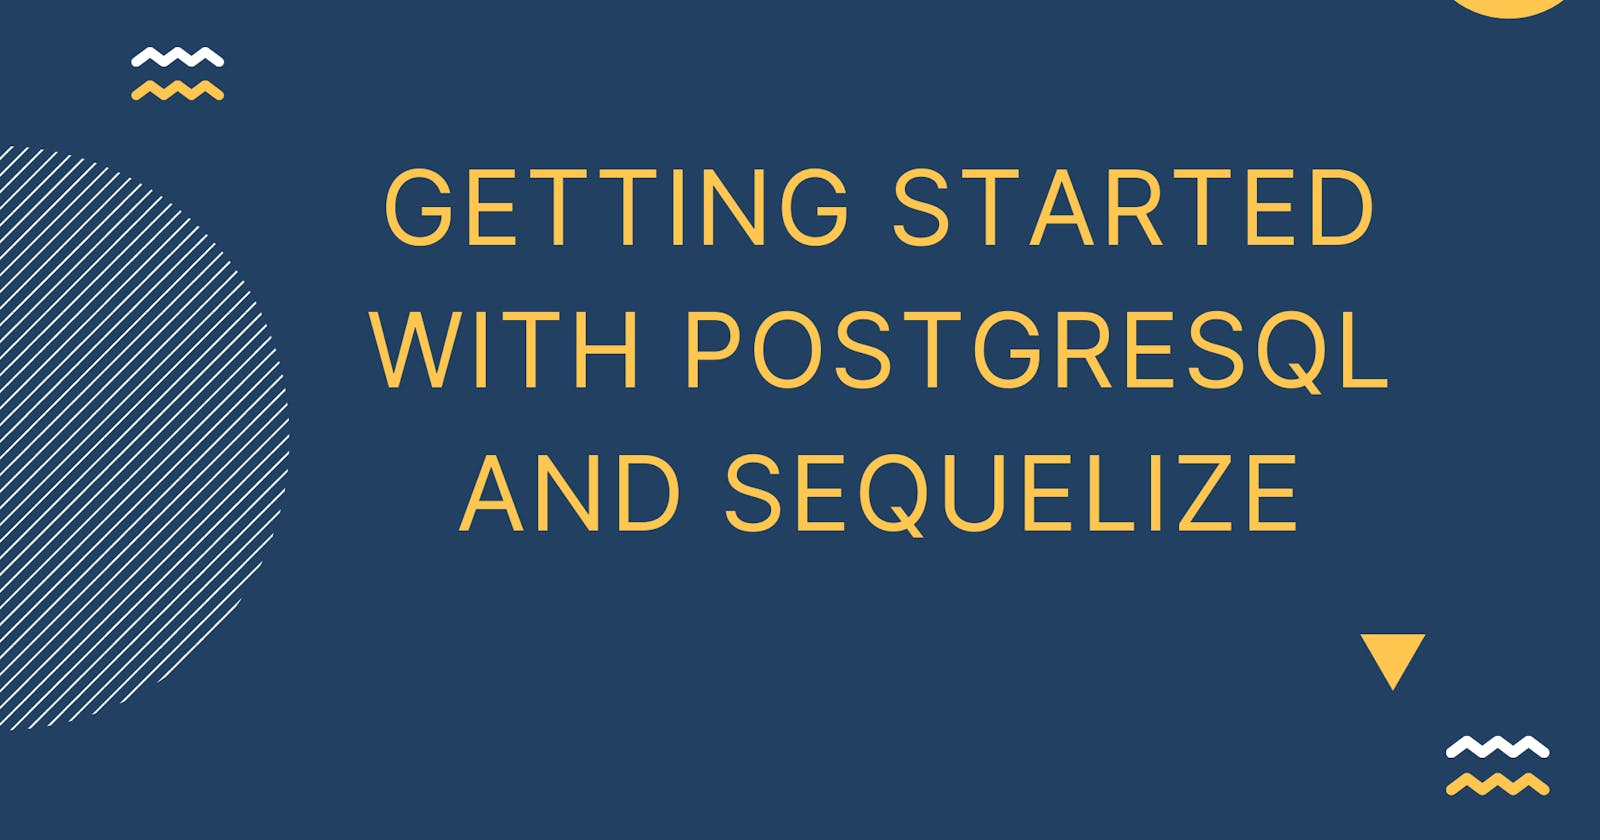 Getting Started with PostgreSQL and Sequelize